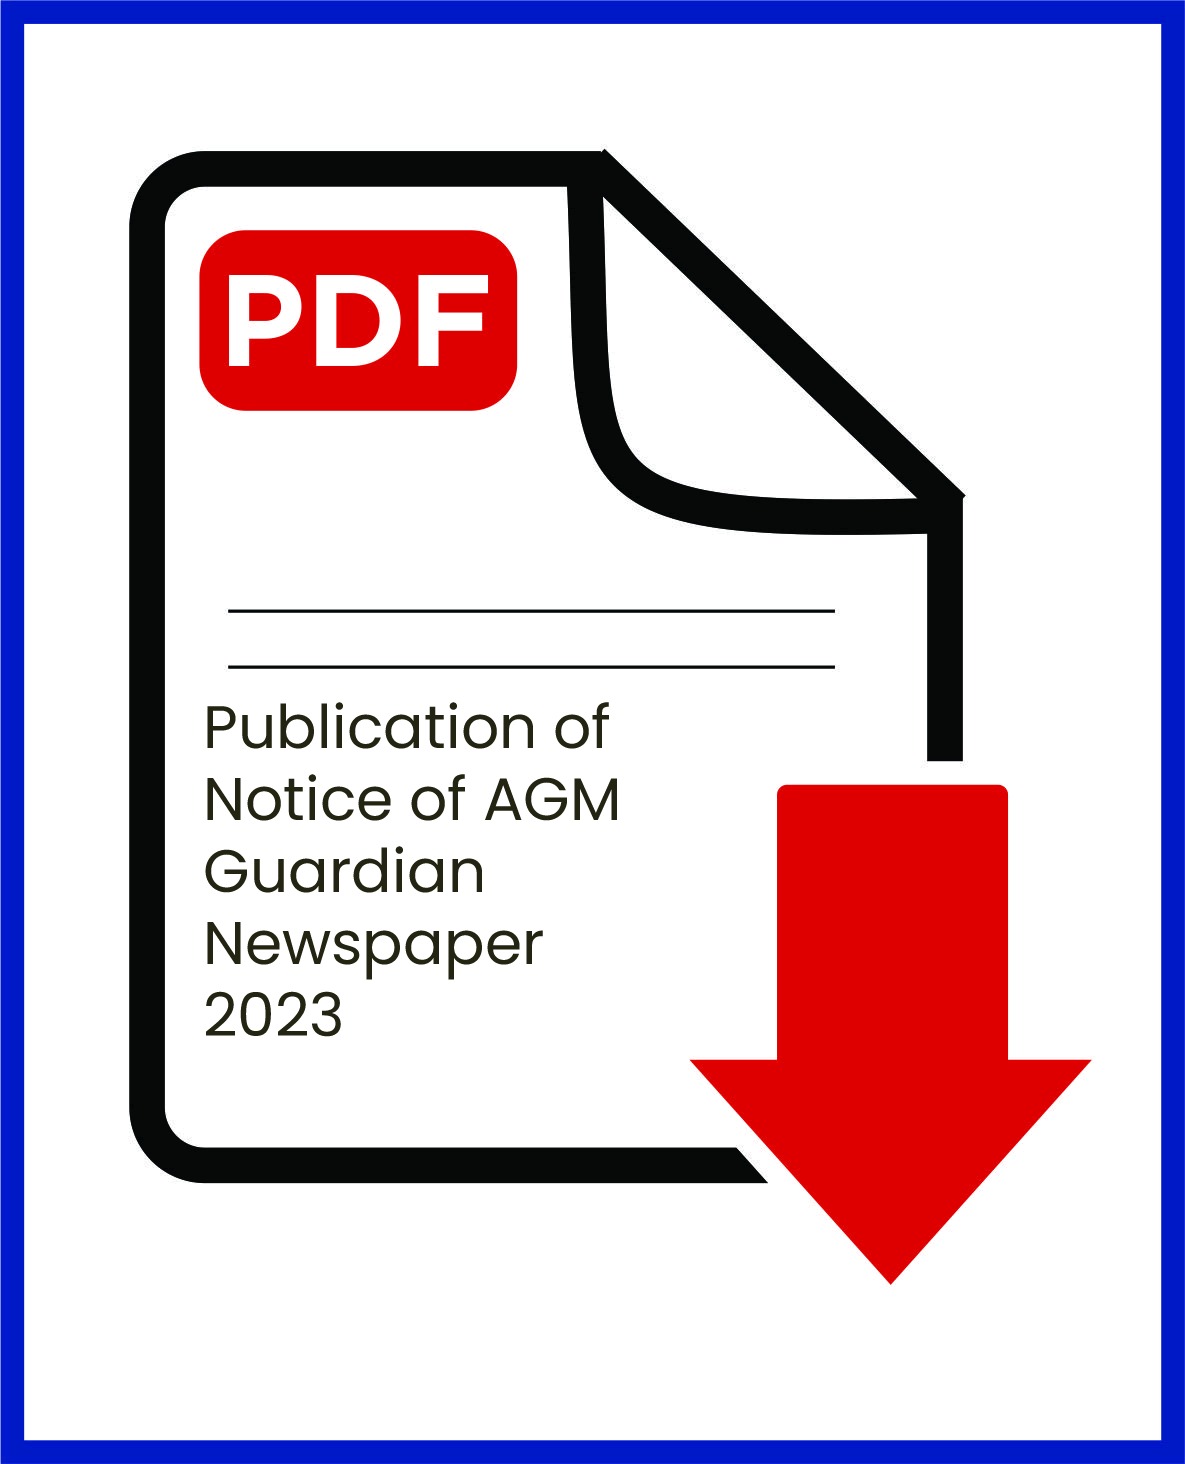 Publication of Notice of AGM - Guardian Newspaper